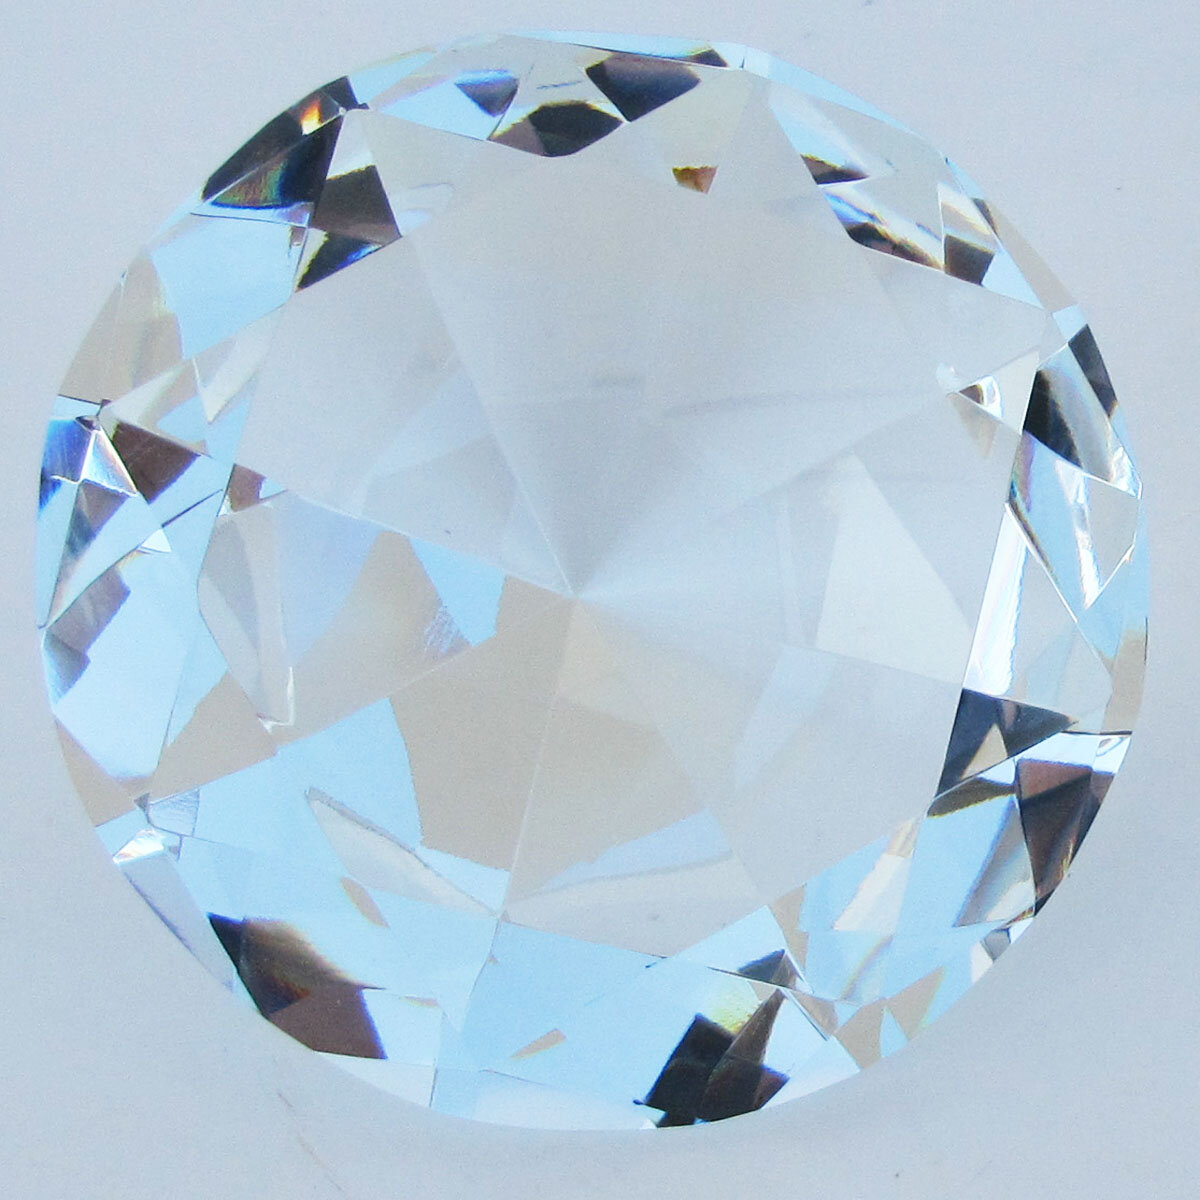 Sea Blue Crystal Glass Paperweight Faceted Cut Giant Diamond Jewel Decor 